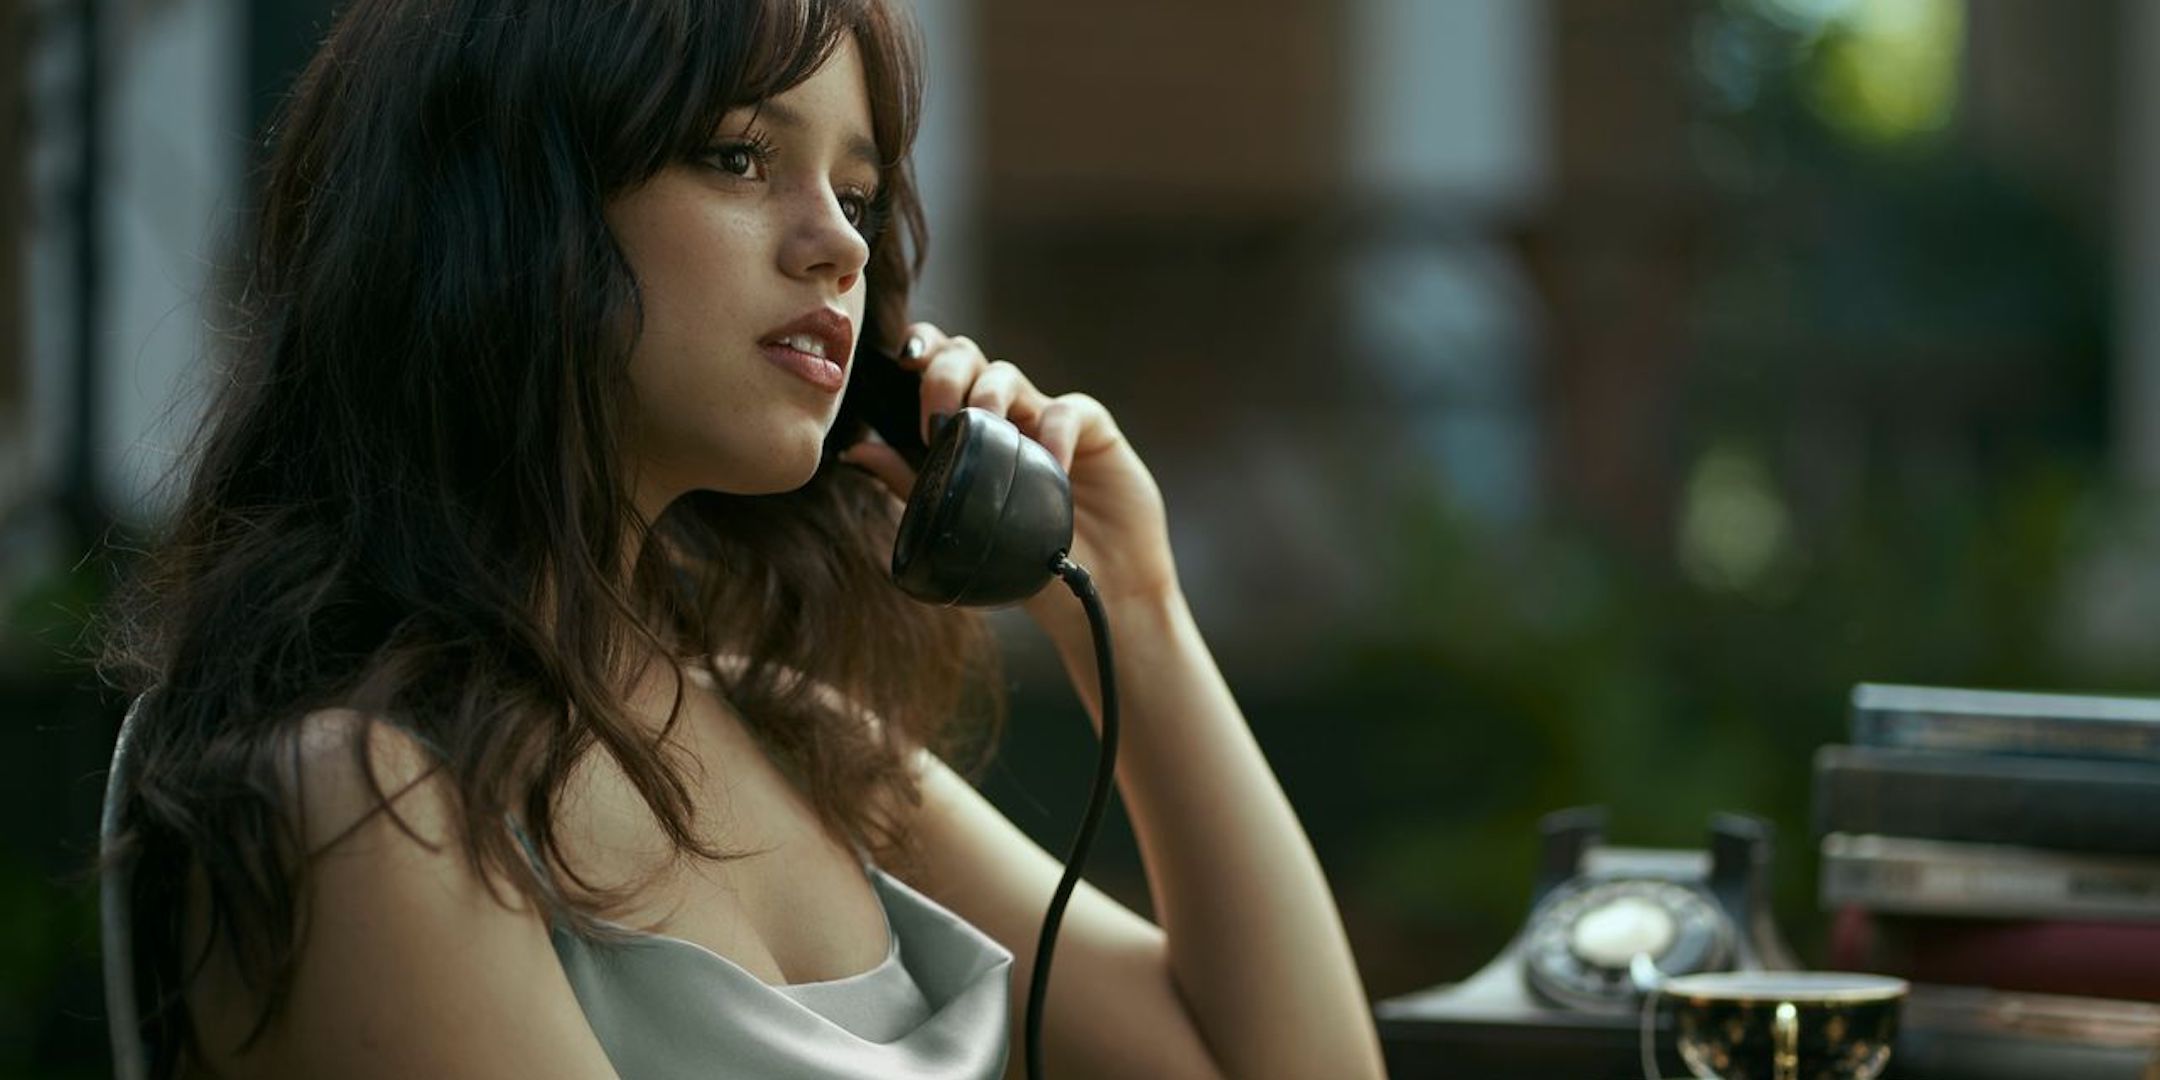 Cairo uses the phone in Miller's Girl